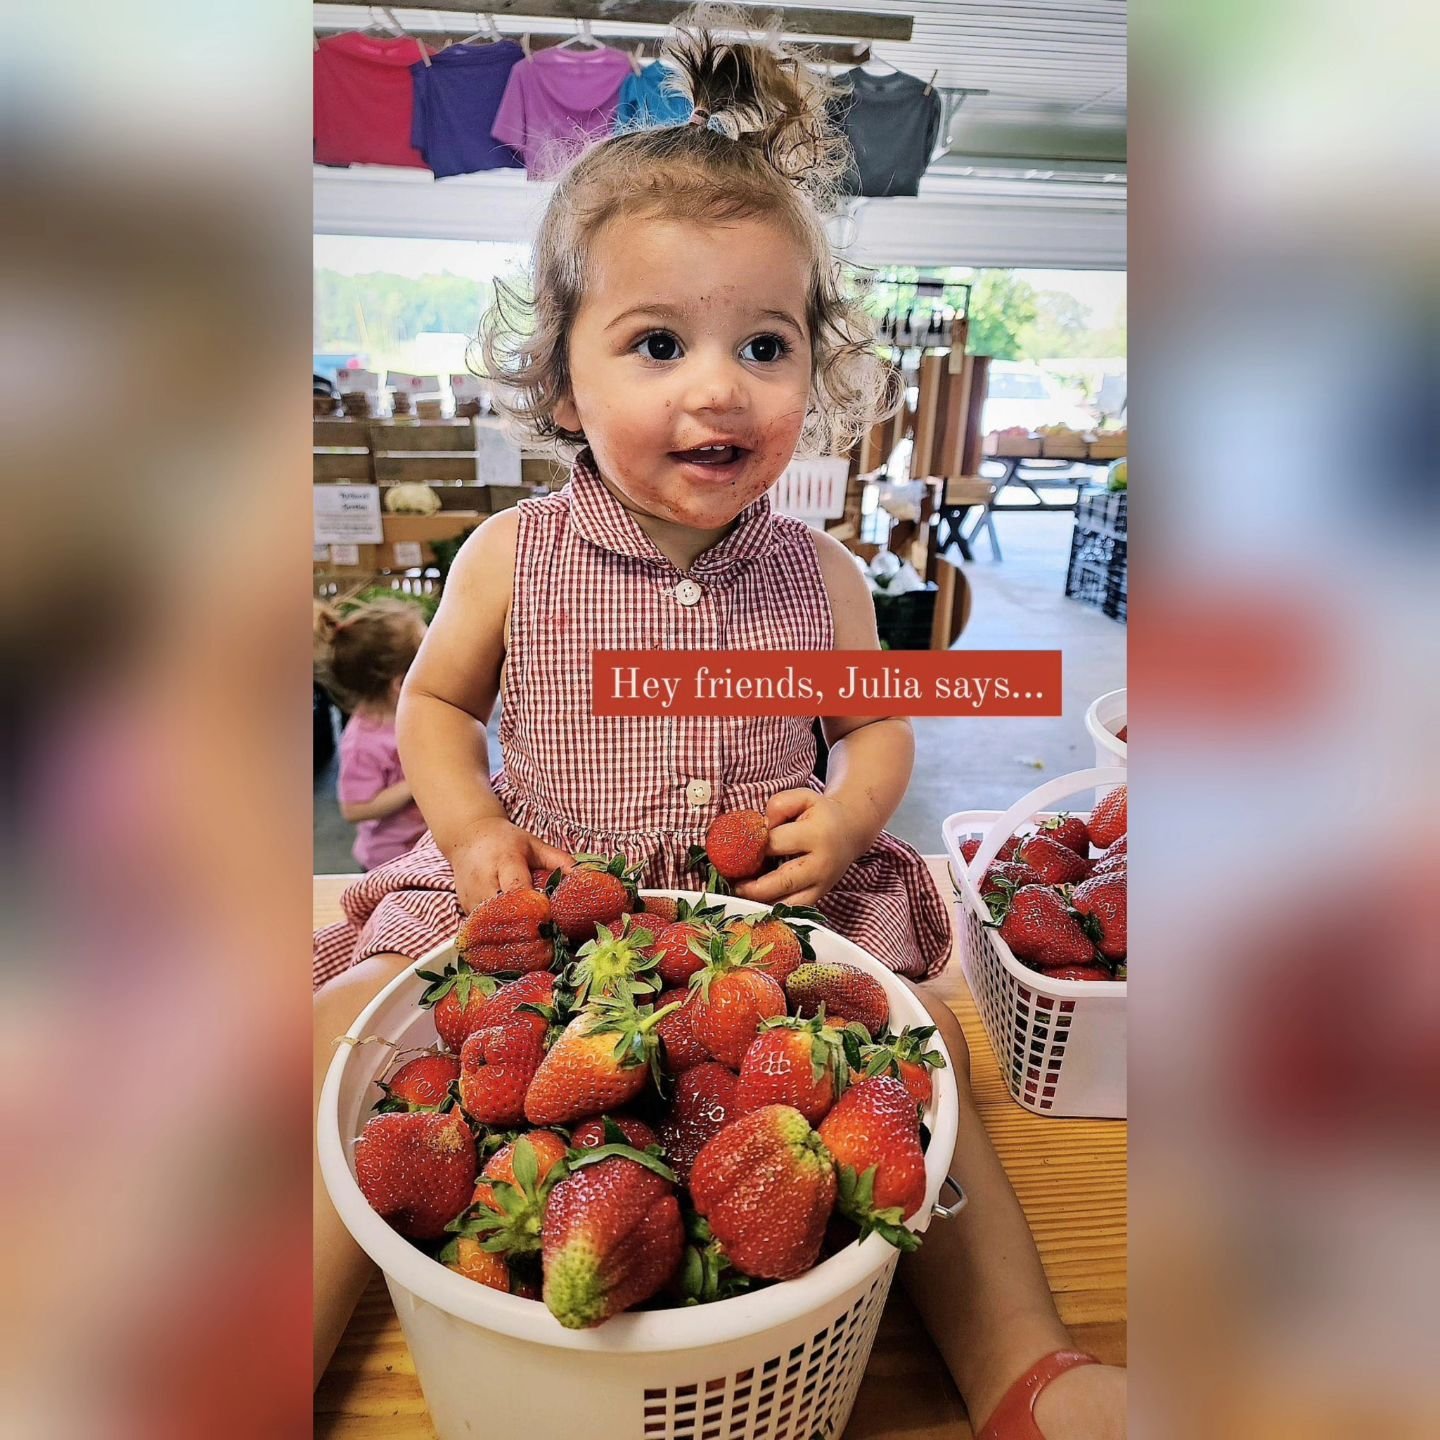 A little snippet of &quot;Julia Says&quot; 📣 (I mean what's cuter!?!)

🍓Pick Your Own Strawberry 🍓 
Everyday 9 a - 6:30 p

22645 Kings Highway. VA, 22572
804-493-3013

#Garners #FarmandMarket #Strawberries #StrawberrySeason #PickYourOwn #UPick #Sp